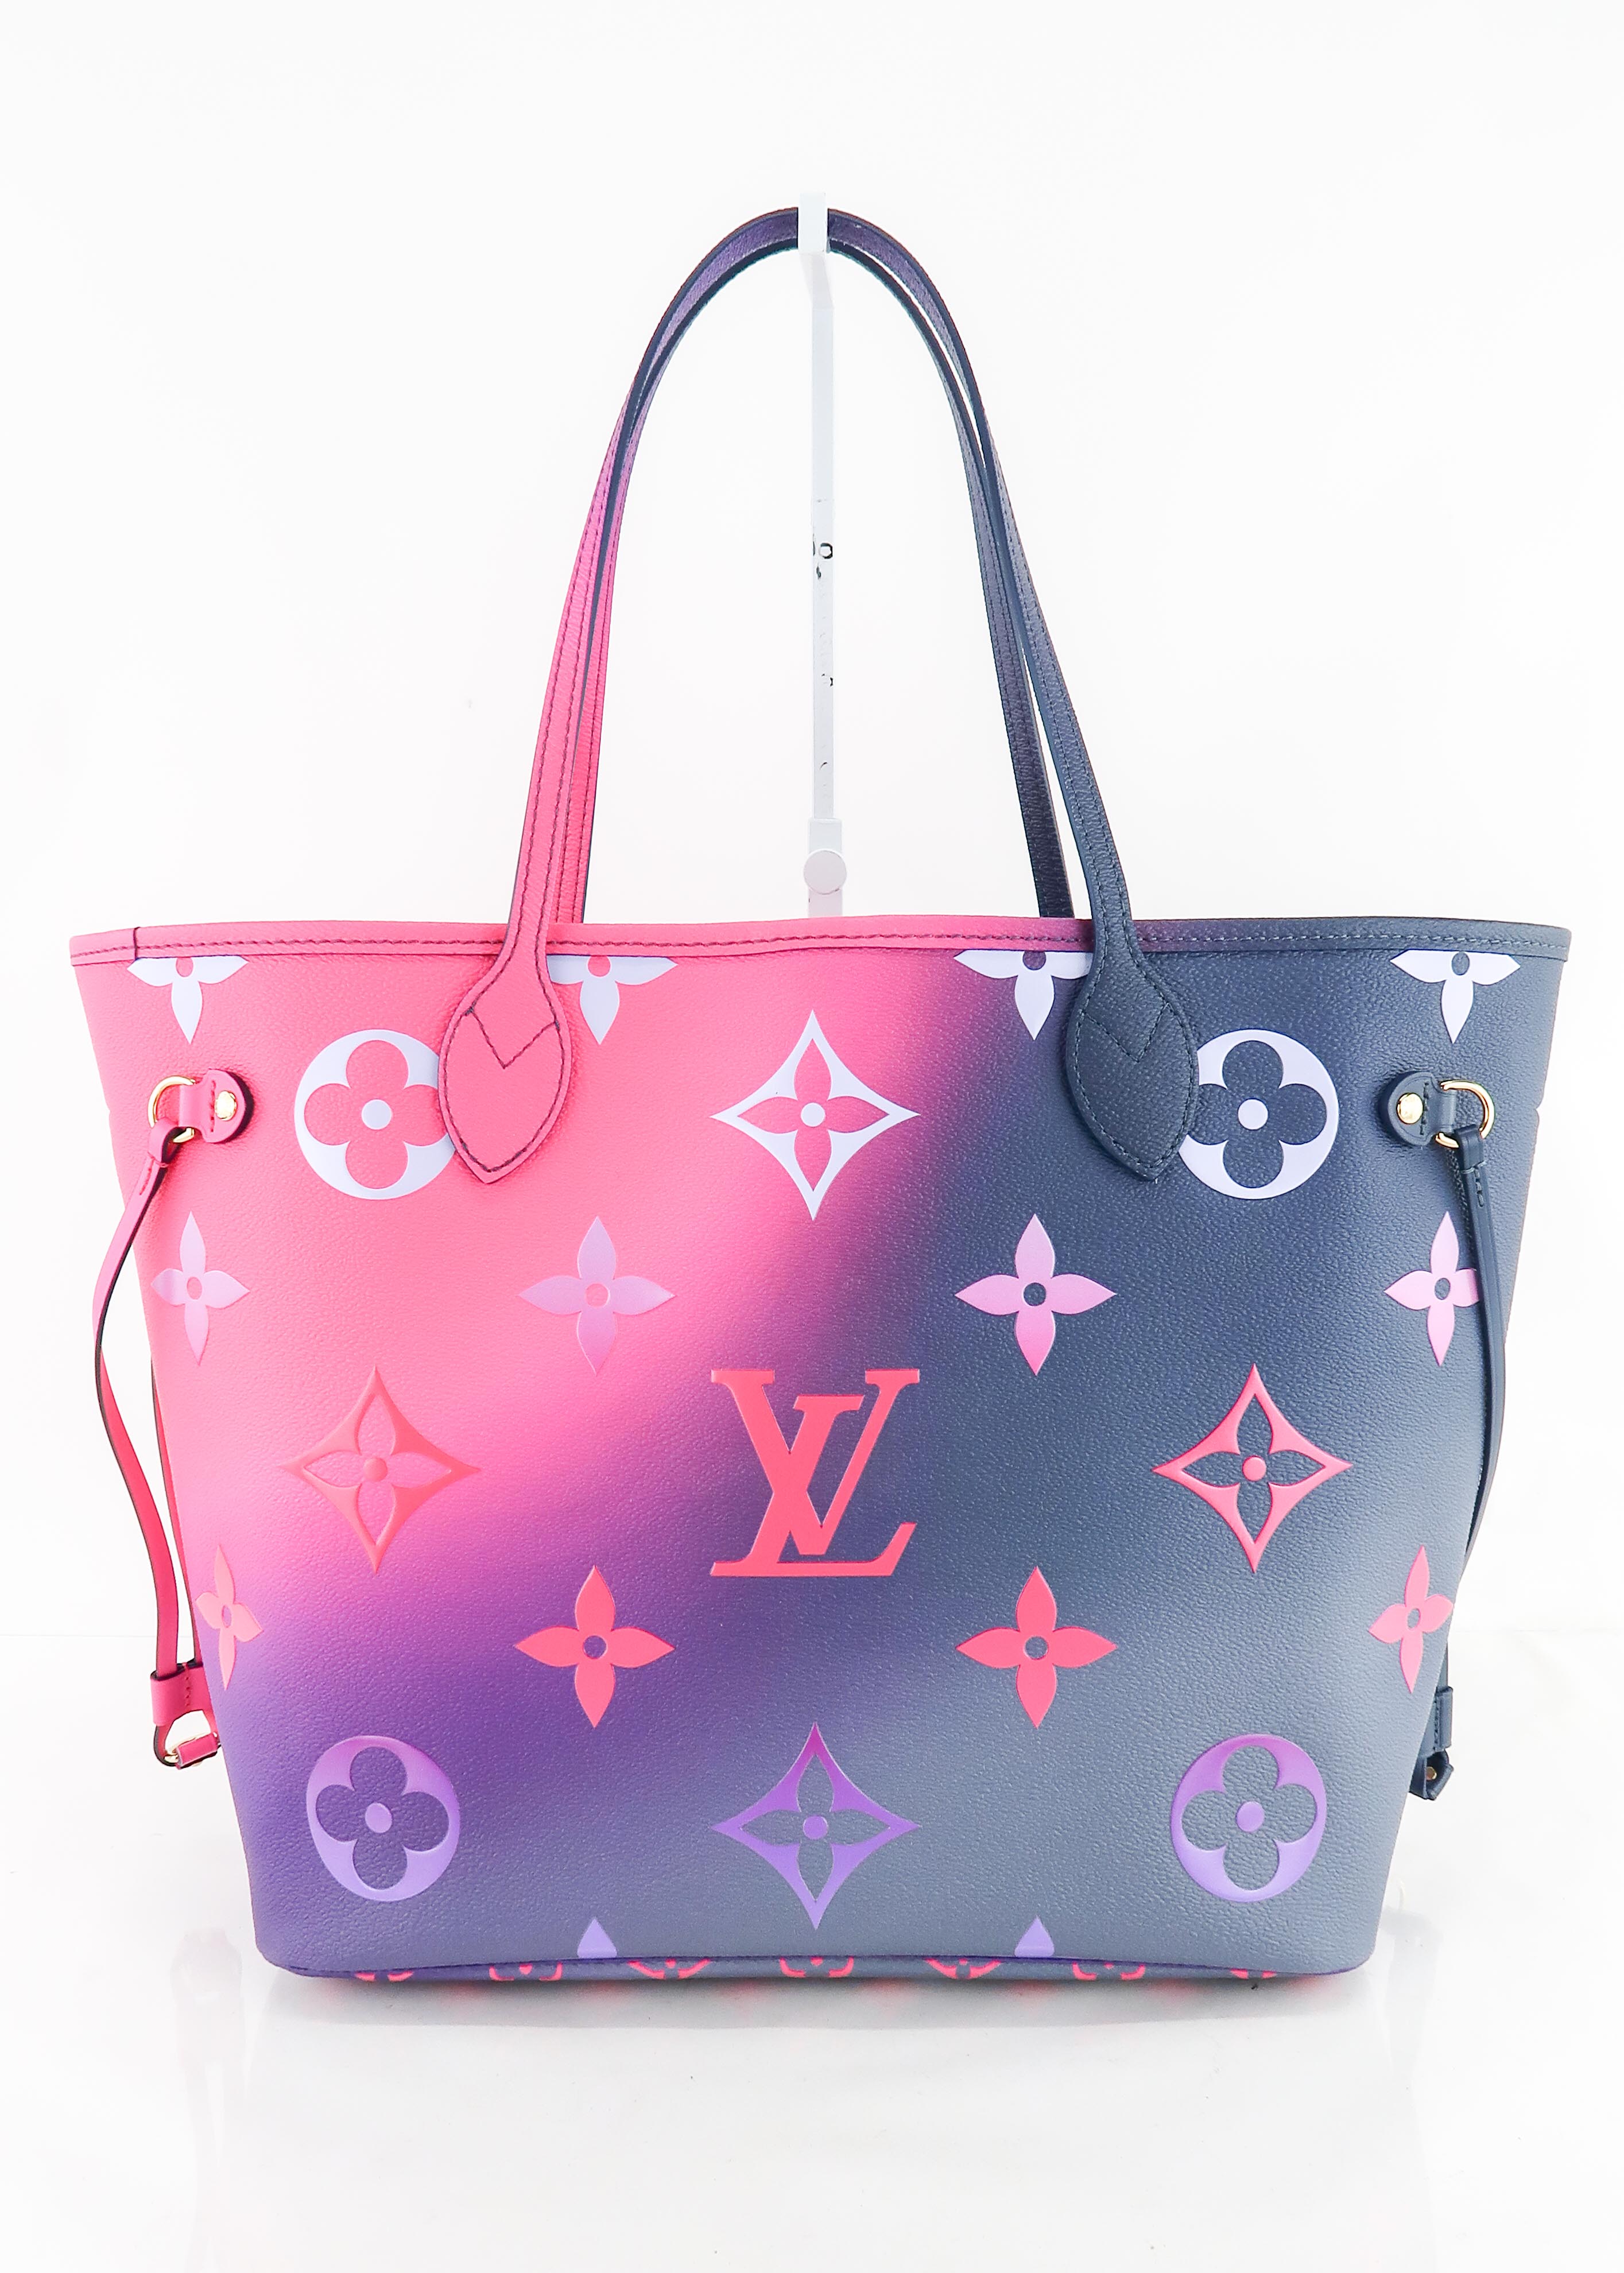 Louis Vuitton Spring In The City Collection & New Bag Unboxing!! 🦄 